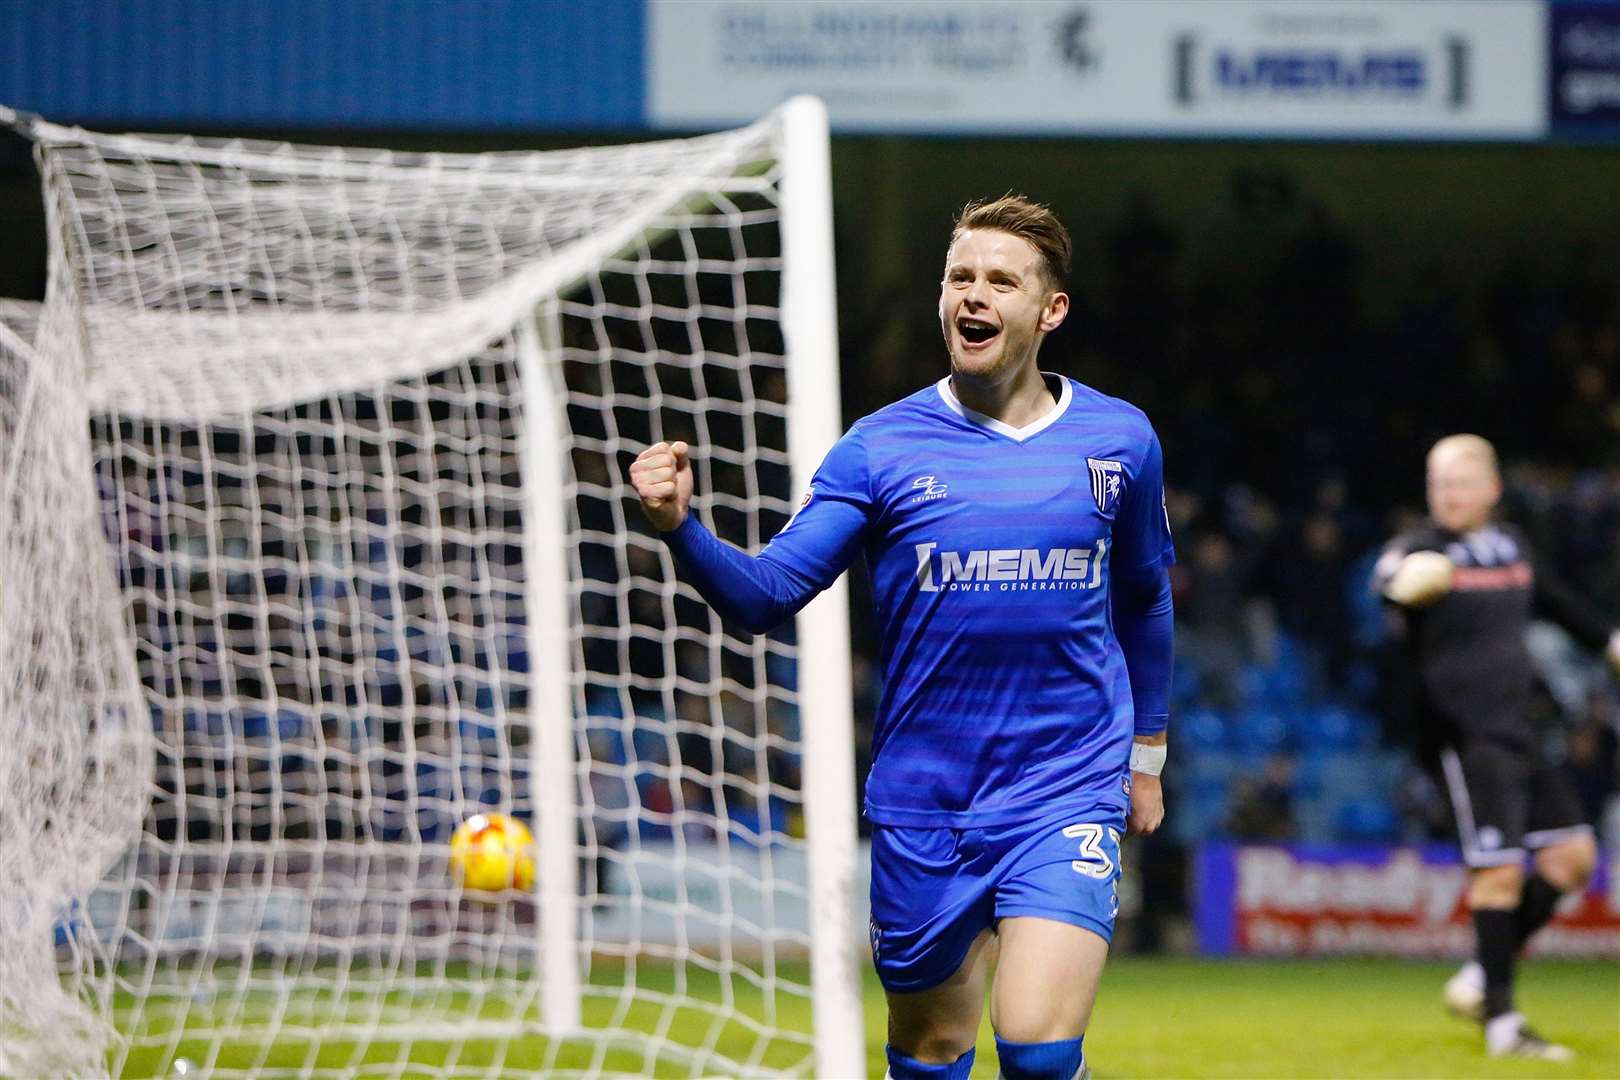 Mark Byrne celebrates scoring a goal for the Gills at Priestfield Picture: Andy Jones